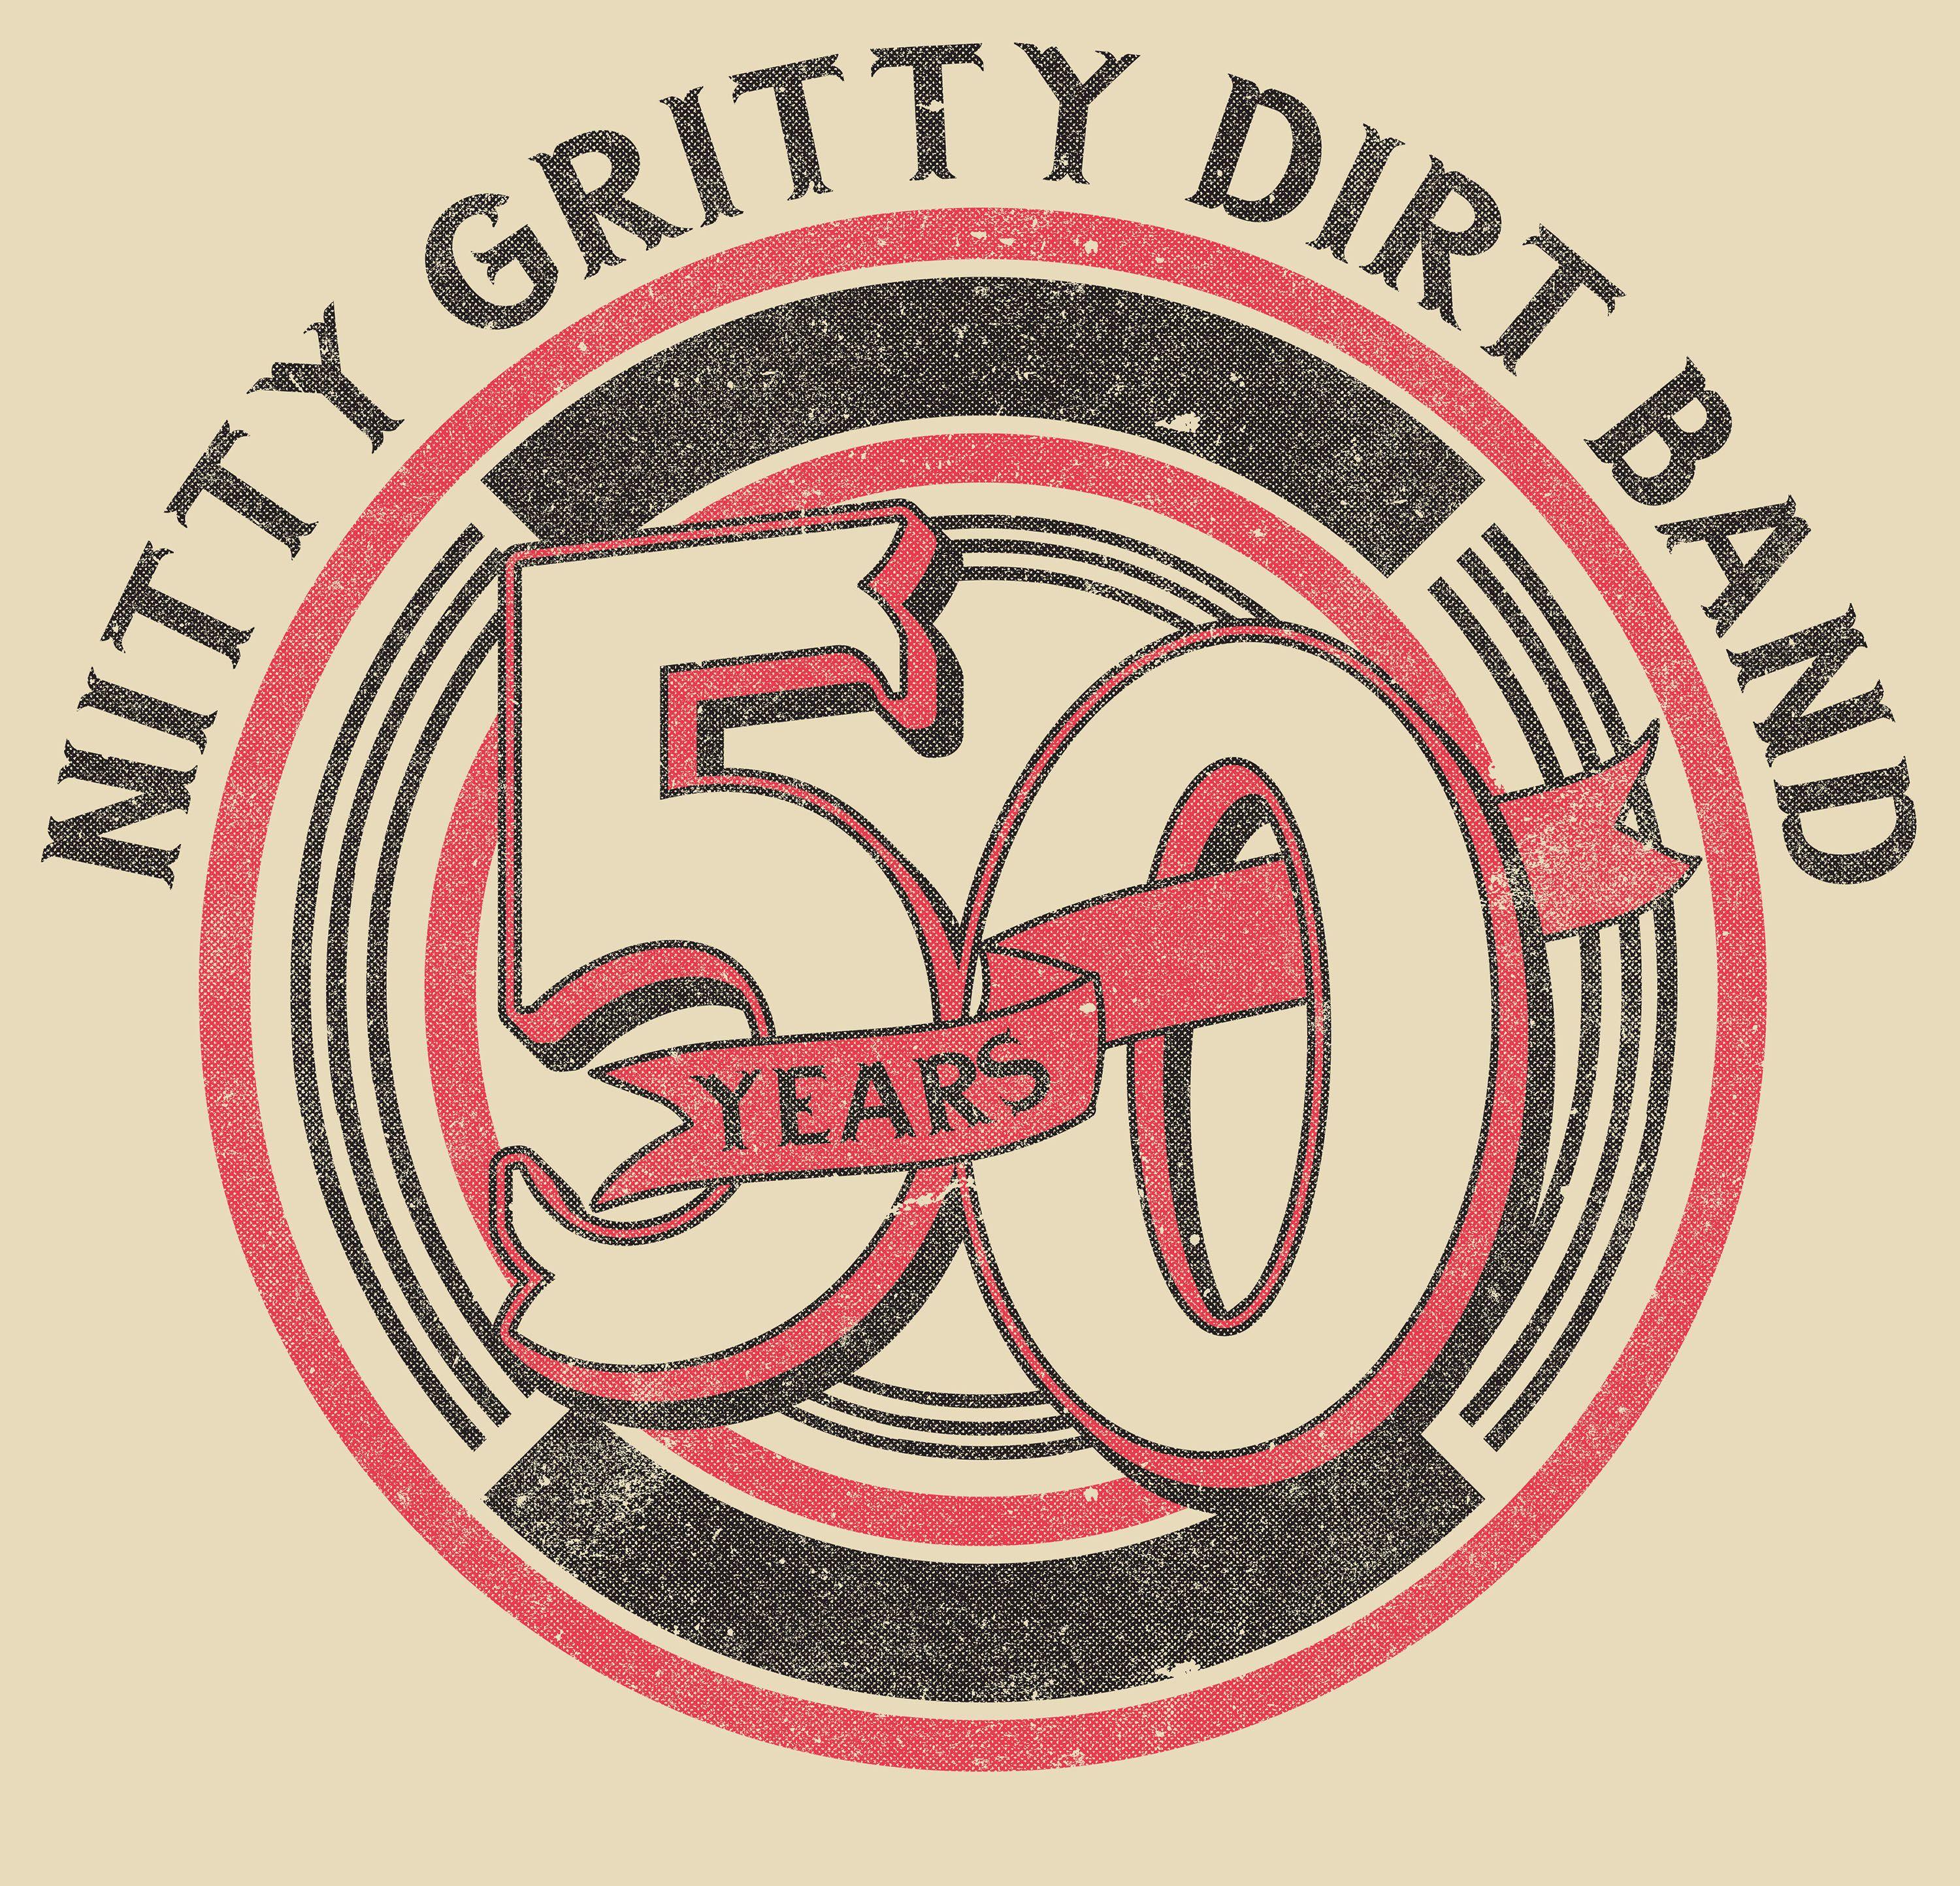 The Nitty Gritty Dirt Band Logo - Nitty Gritty Dirt Band Logo - BackStage360.com